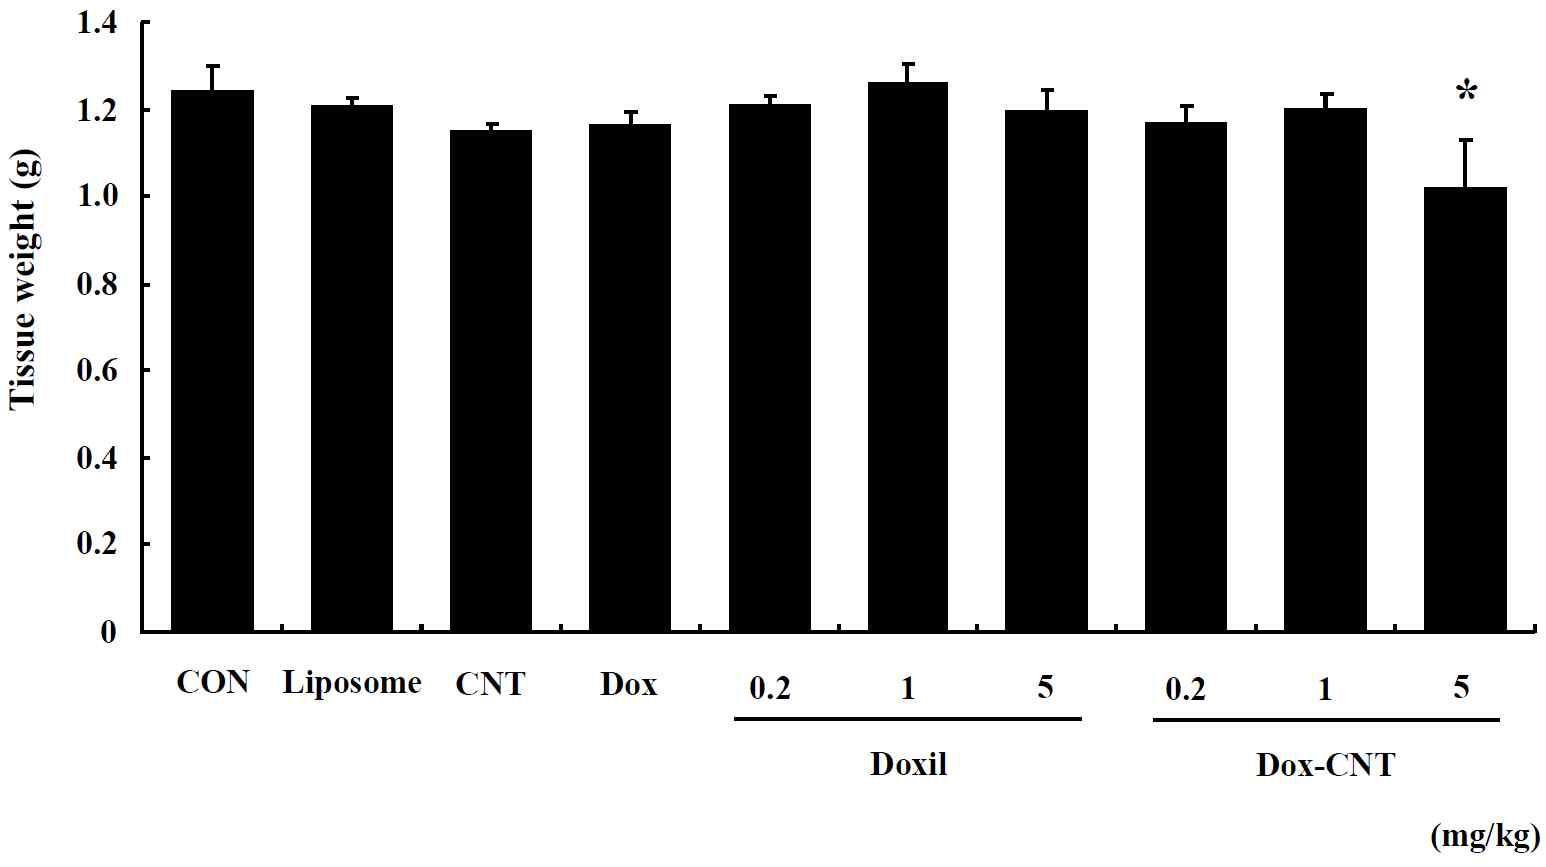 The change of heart weight in single exposed female ICR mice for 14 days. Mice were respectively administered by intravenous injection with liposome, CNT, Dox, Doxil (0.2, 1, 5 mg/kg) and Dox-CNT (0.2, 1, 5 mg/kg). The results are presented as mean ± SE (n = 10). * p < 0.05, significantly different from the control